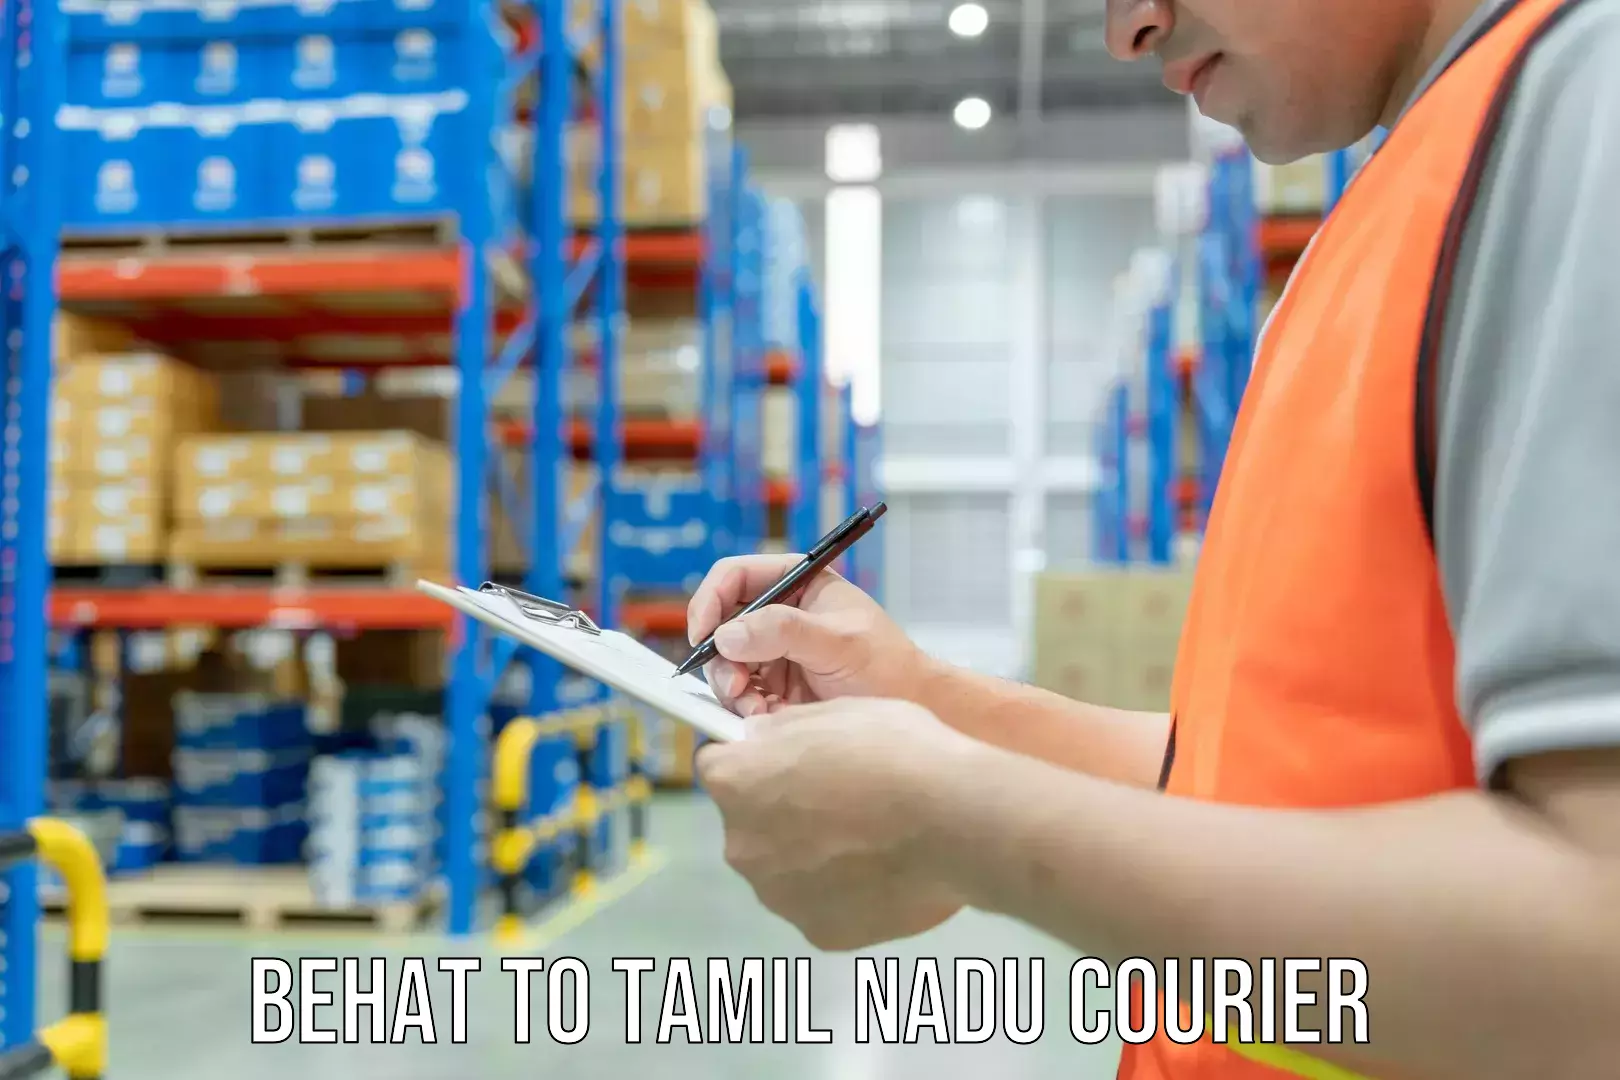 Reliable freight solutions Behat to Tamil Nadu